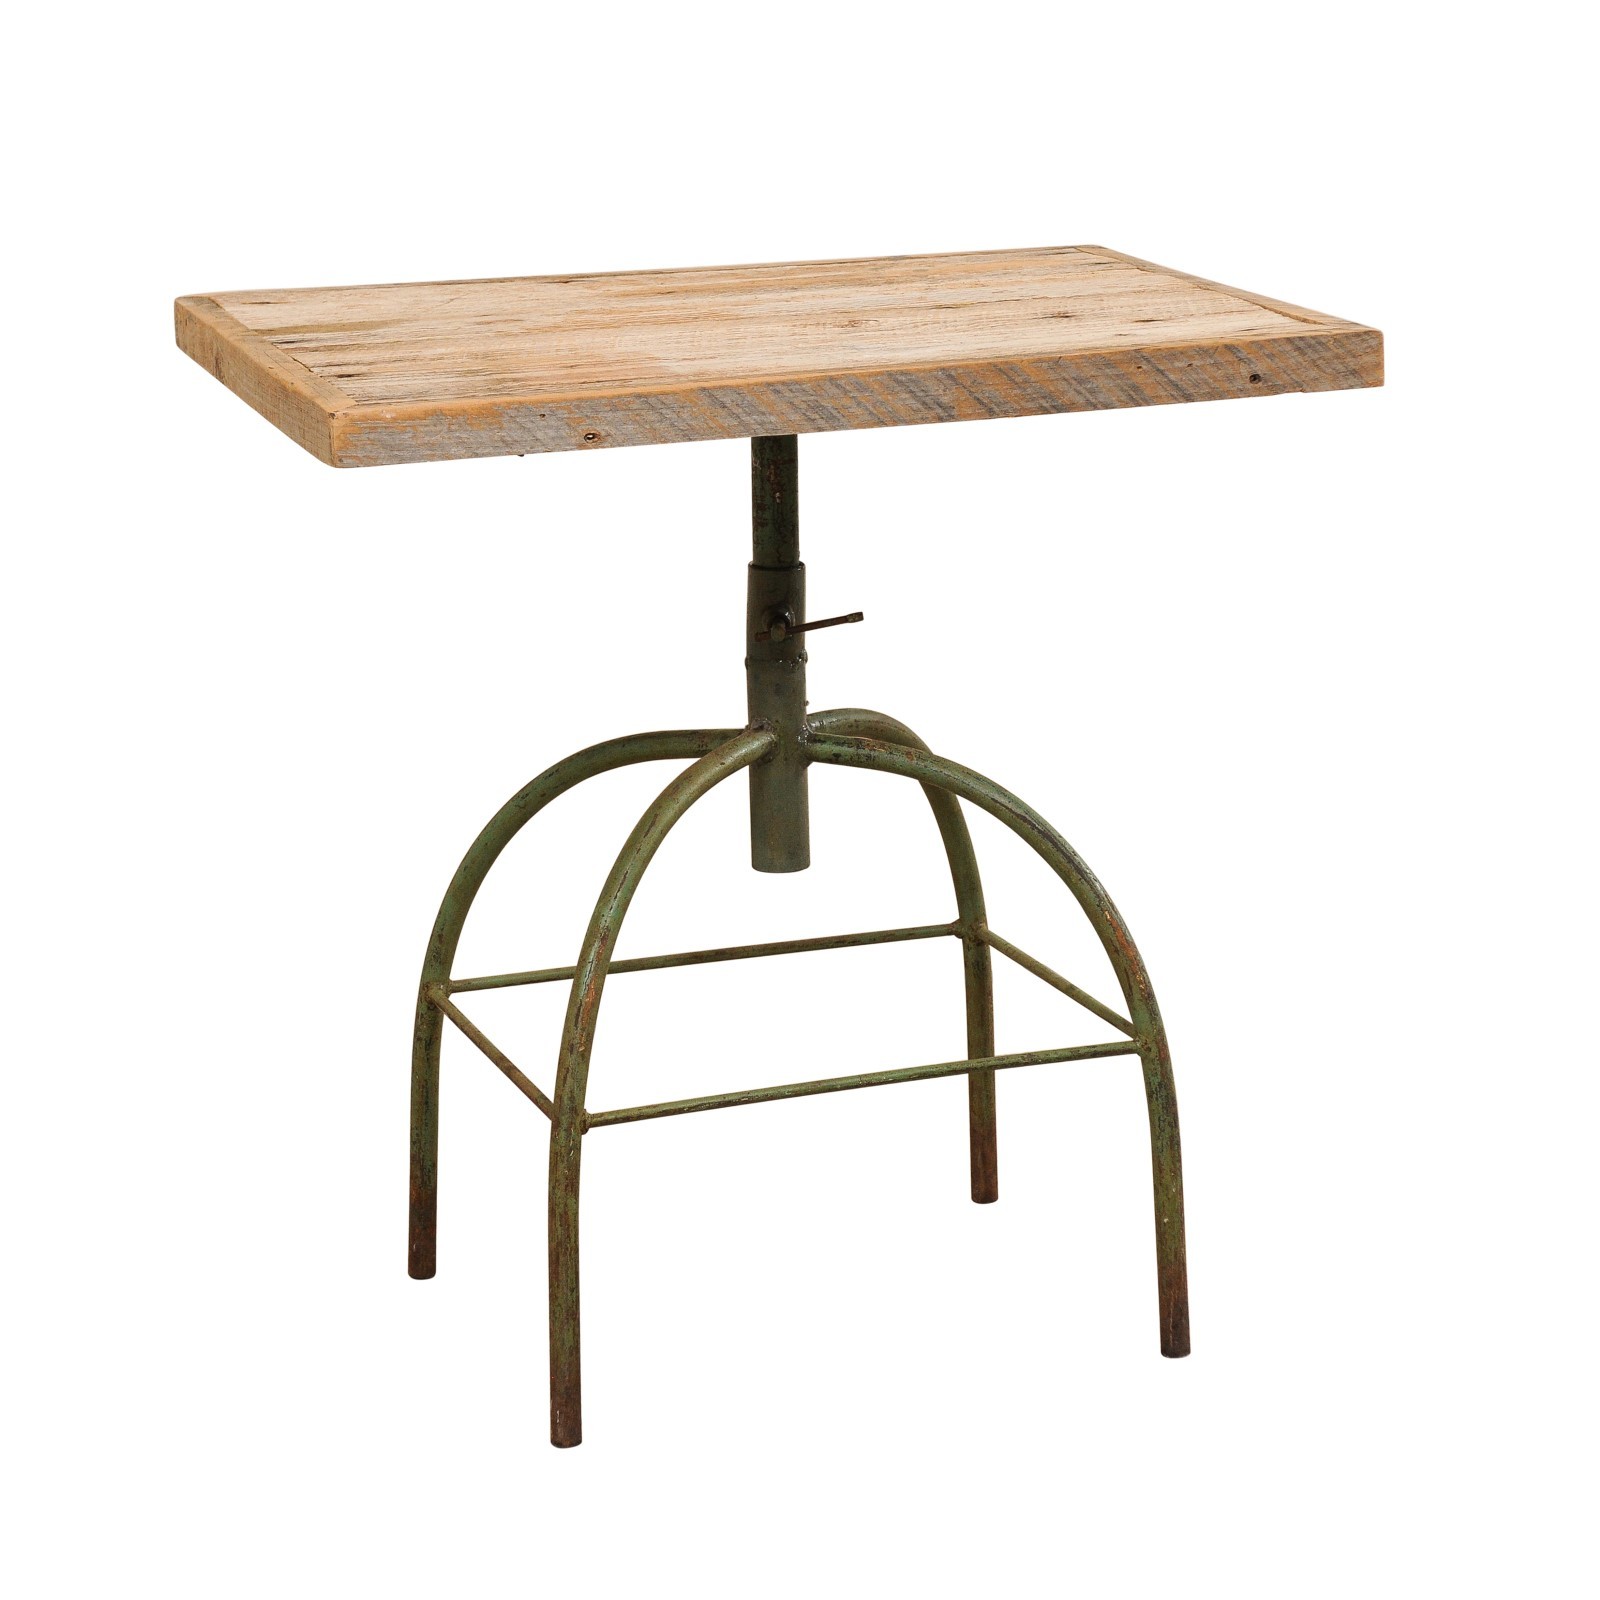 Vintage Industrial Style Side Table